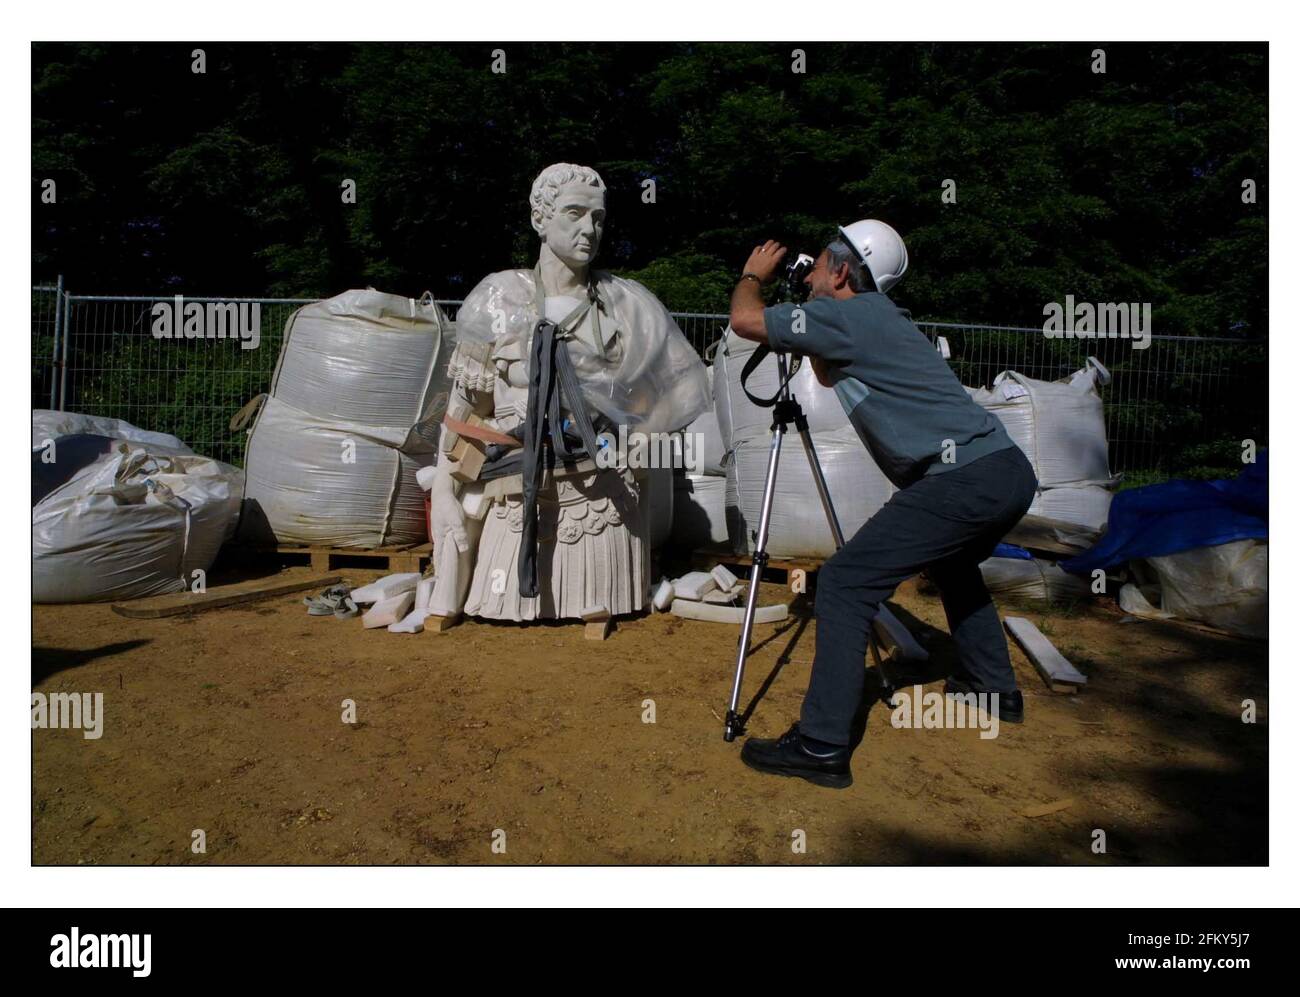 Astatue of Lord Cobham being installed in the world famous landscape gardens he created at Stowe. The original statue was knocked from its vantage point atop the tallest of Stowes monuments in 1957 when it was struck by lightning and shattered.pic David Sandison 30/5/2001 Stock Photo